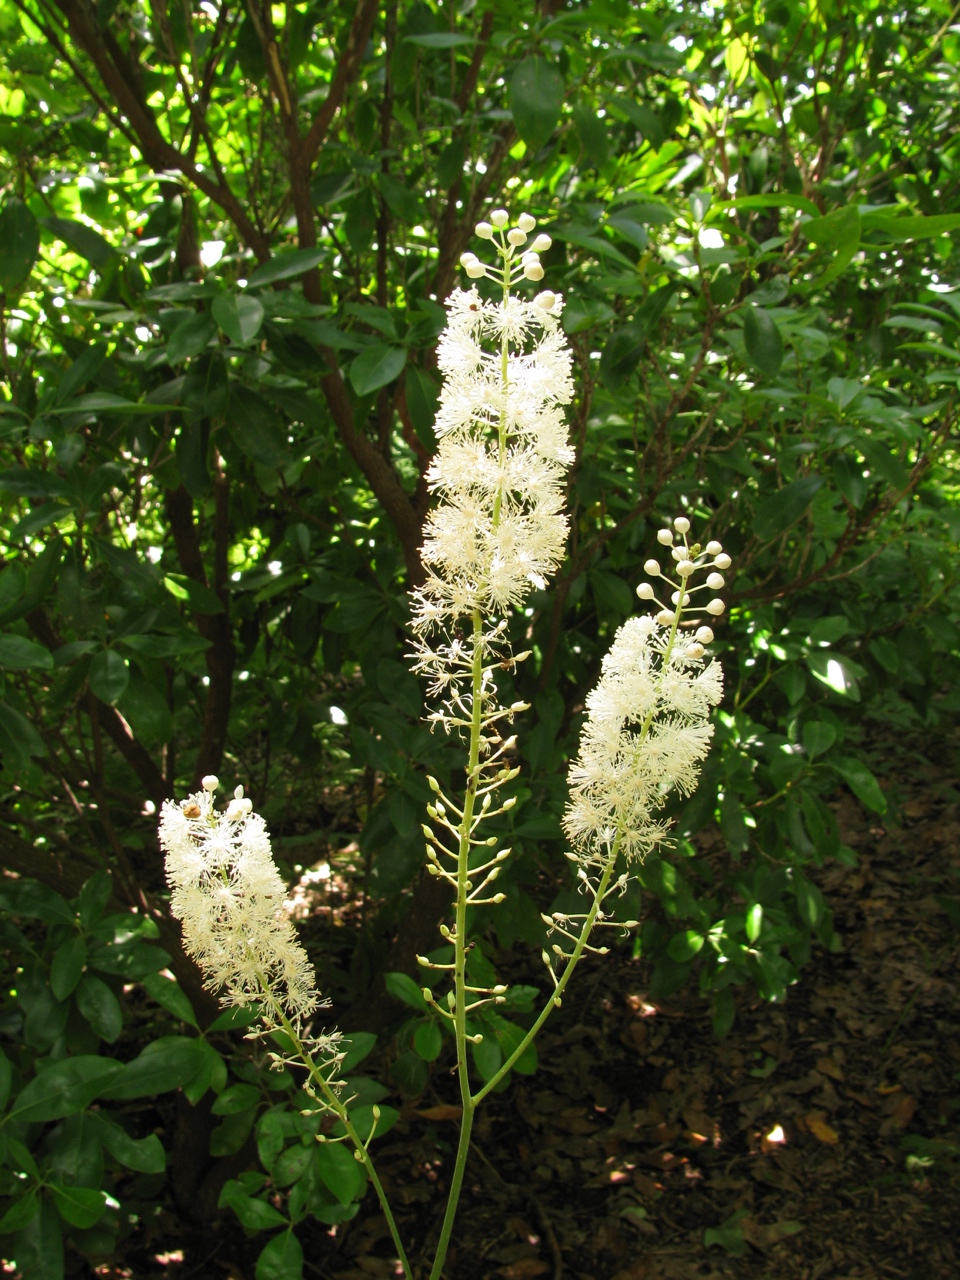 The Scientific Name is Actaea racemosa [= Cimicifuga racemosa]. You will likely hear them called Common Black Cohosh, Early Black Cohosh. This picture shows the The white flowers have no petals but consist of tight clusters of many white stamens surrounding a white stigma. of Actaea racemosa [= Cimicifuga racemosa]